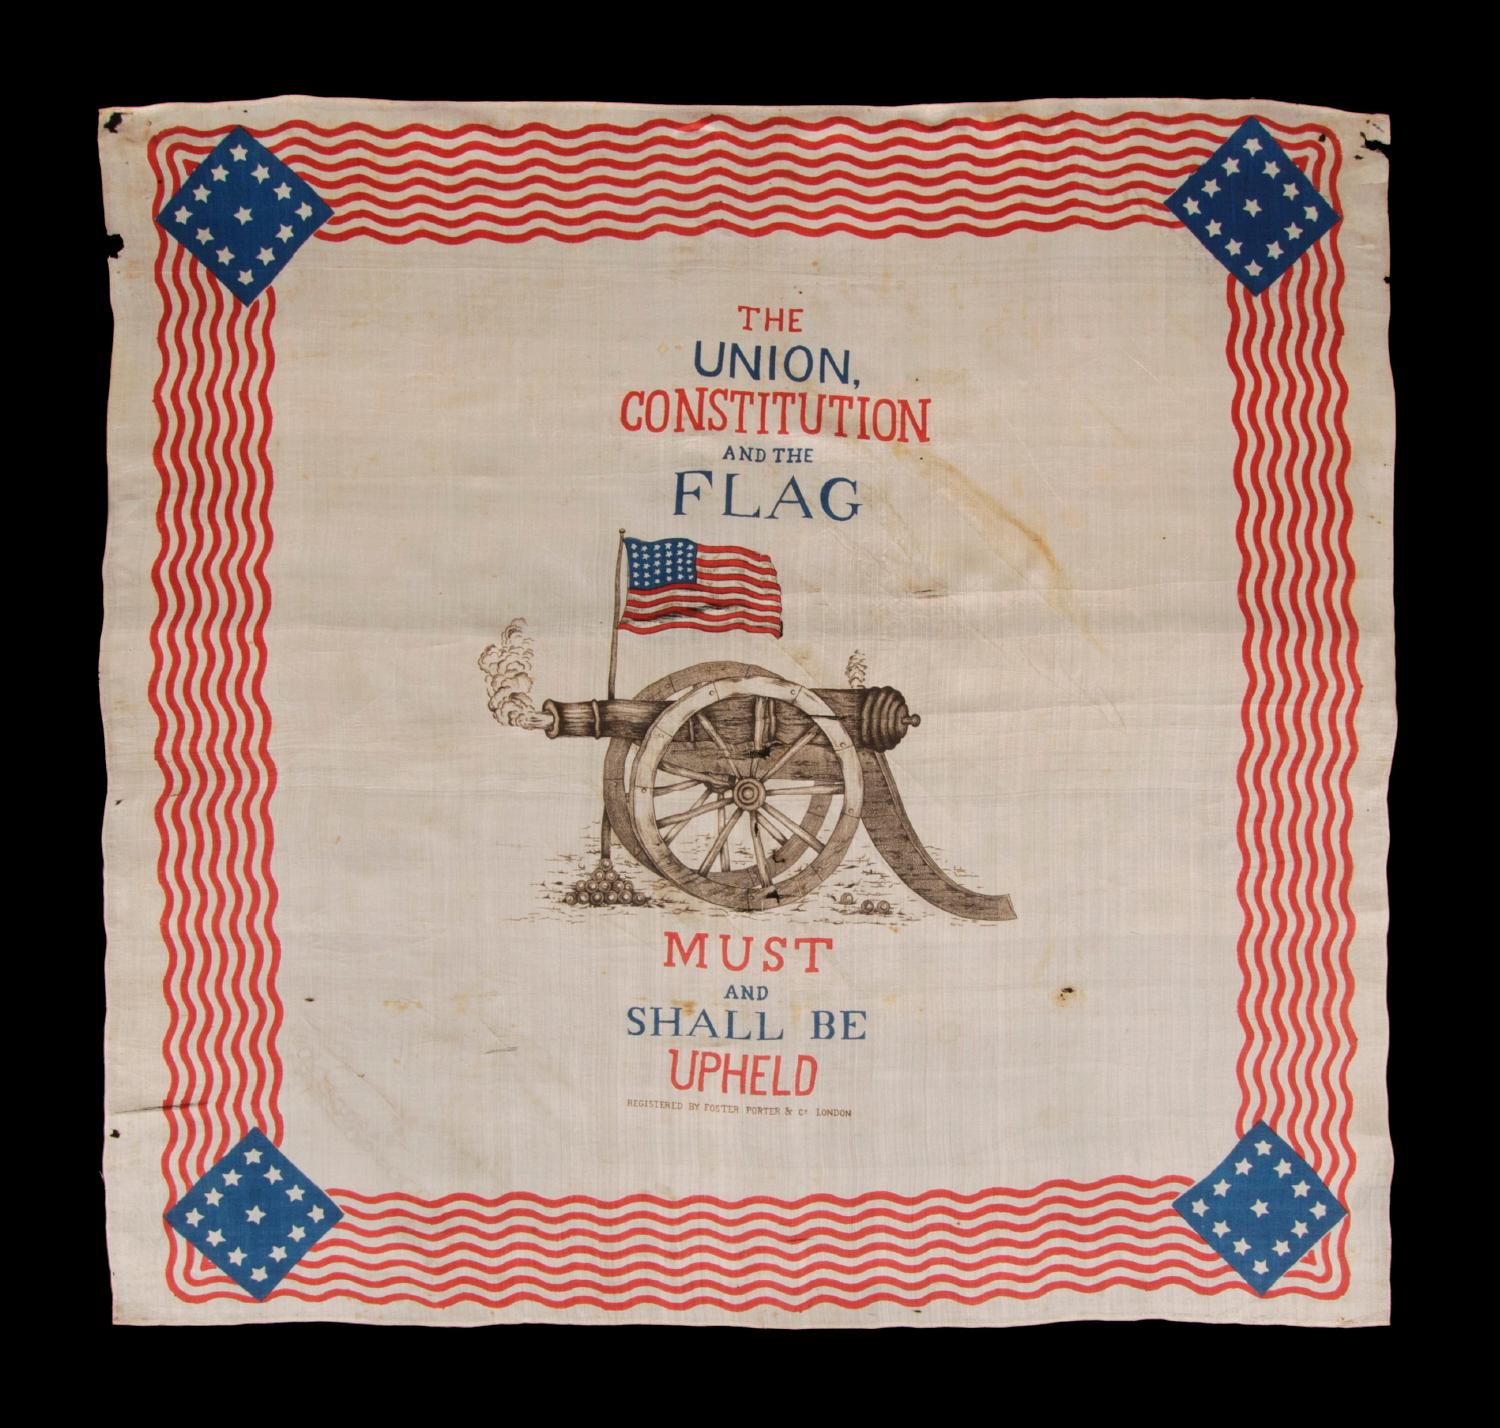 EXTREMELY RARE, PATRIOTIC, SILK KERCHIEF OF THE CIVIL WAR PERIOD, MADE IN LONDON FOR THE AMERICAN MARKET IN 1861 BY FOSTER & PORTER, WITH IMAGERY THAT CENTERS ON A SMOKING CANNON, BENEATH AN AMERICAN FLAG, WITH A PRO-UNION SLOGAN:

Patriotic